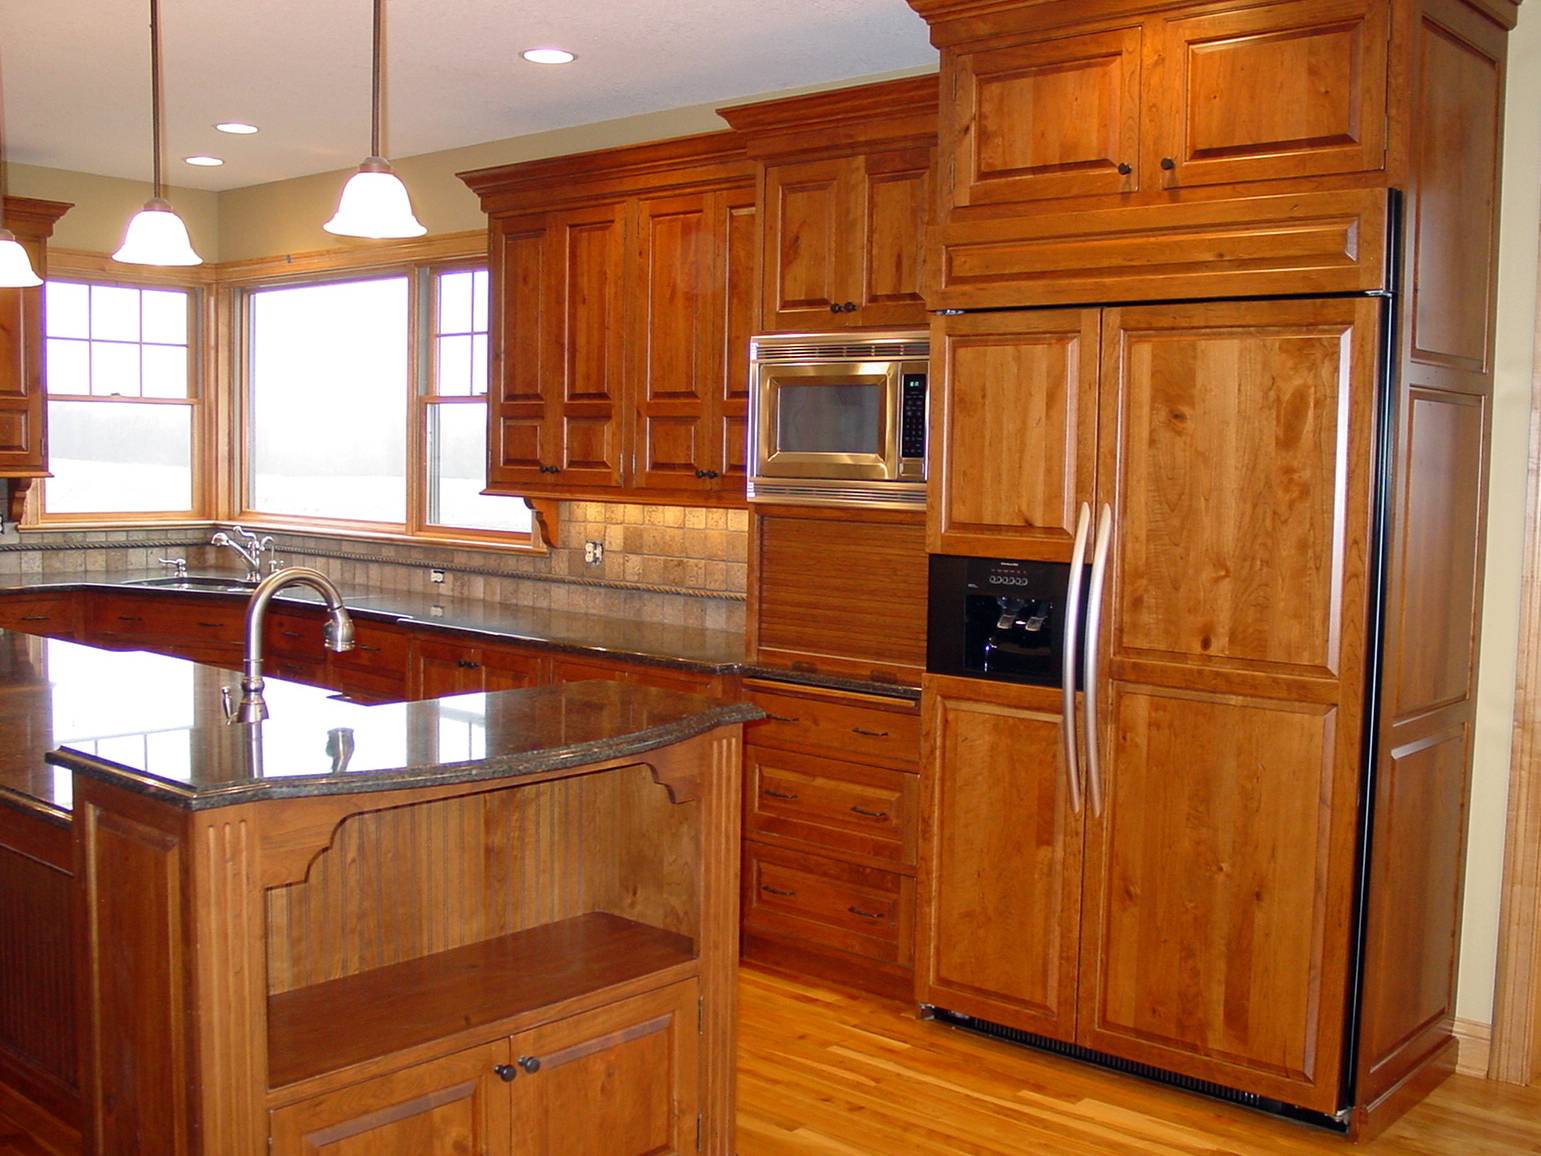 New kitchen with wood cabinets, stone countertops and custom panel fridge